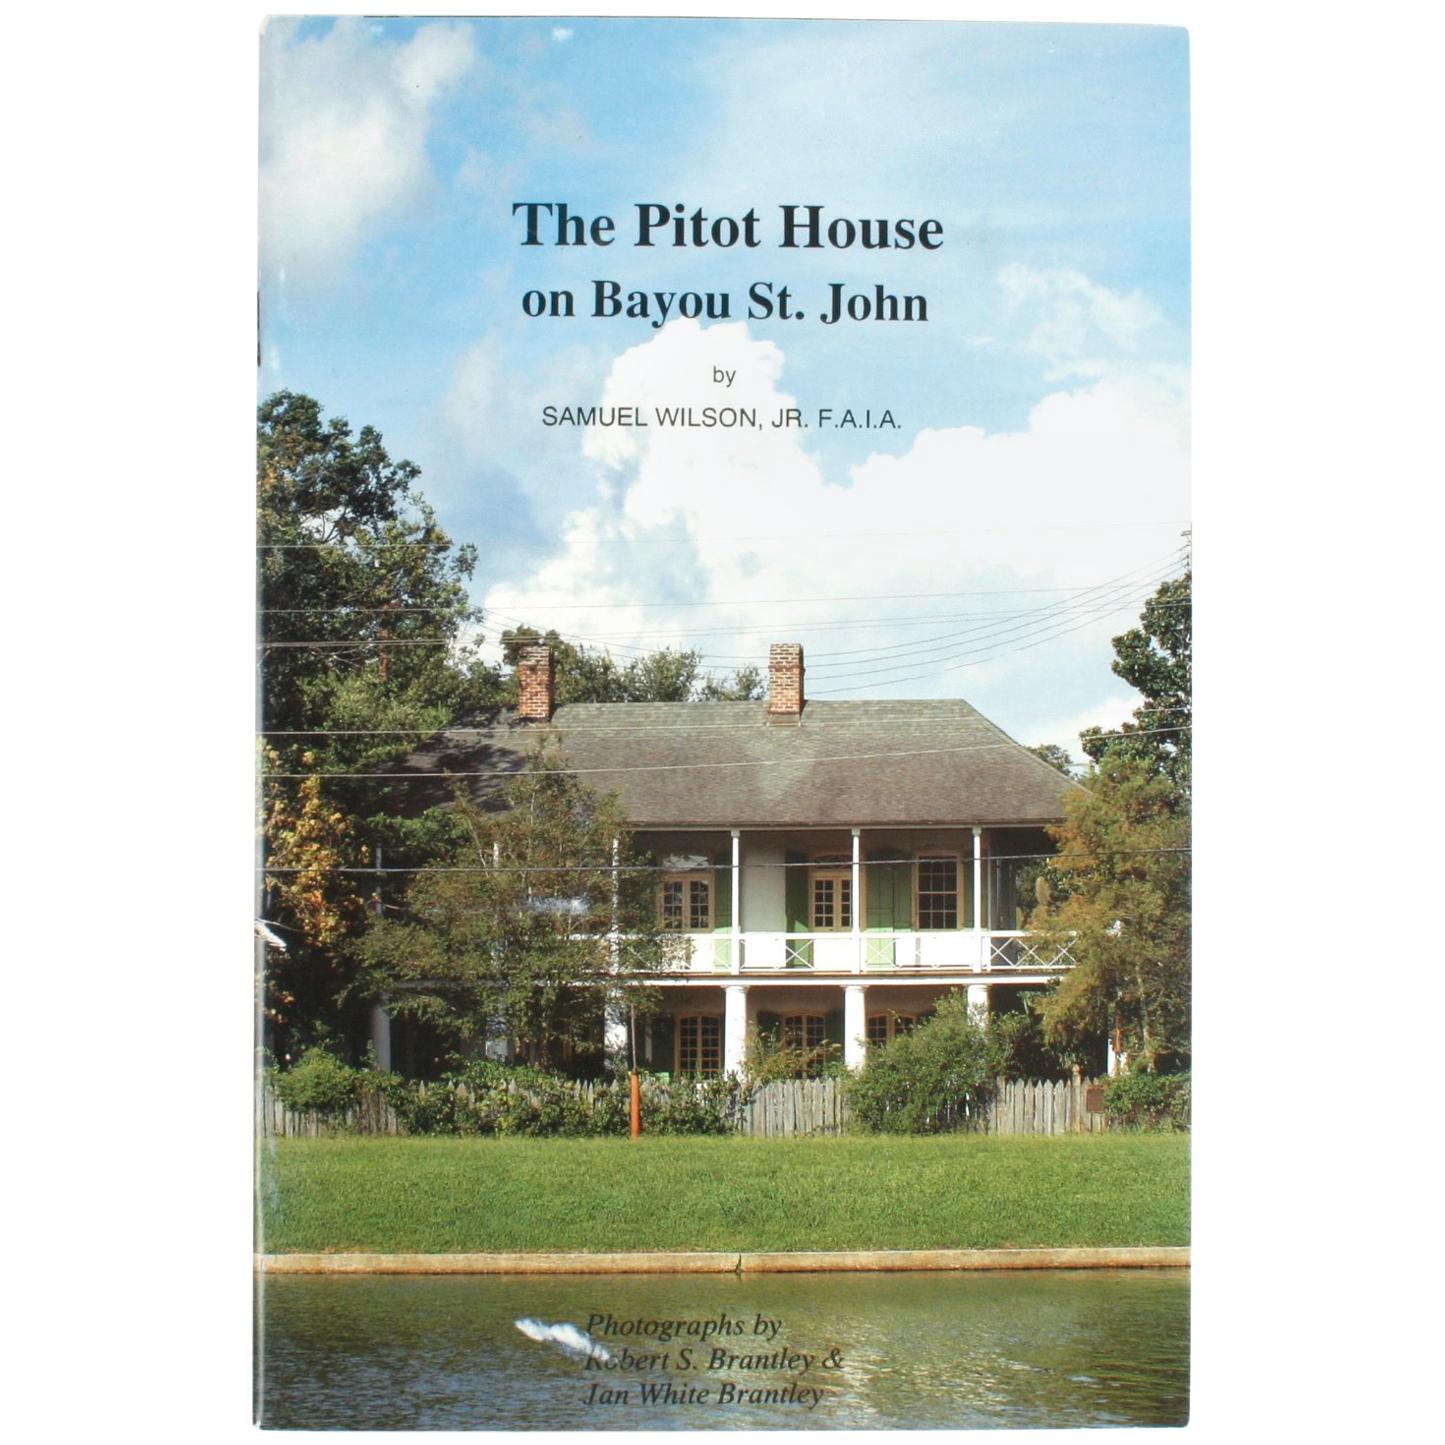 "The Pitot House on Bayou St. John", New Orleans